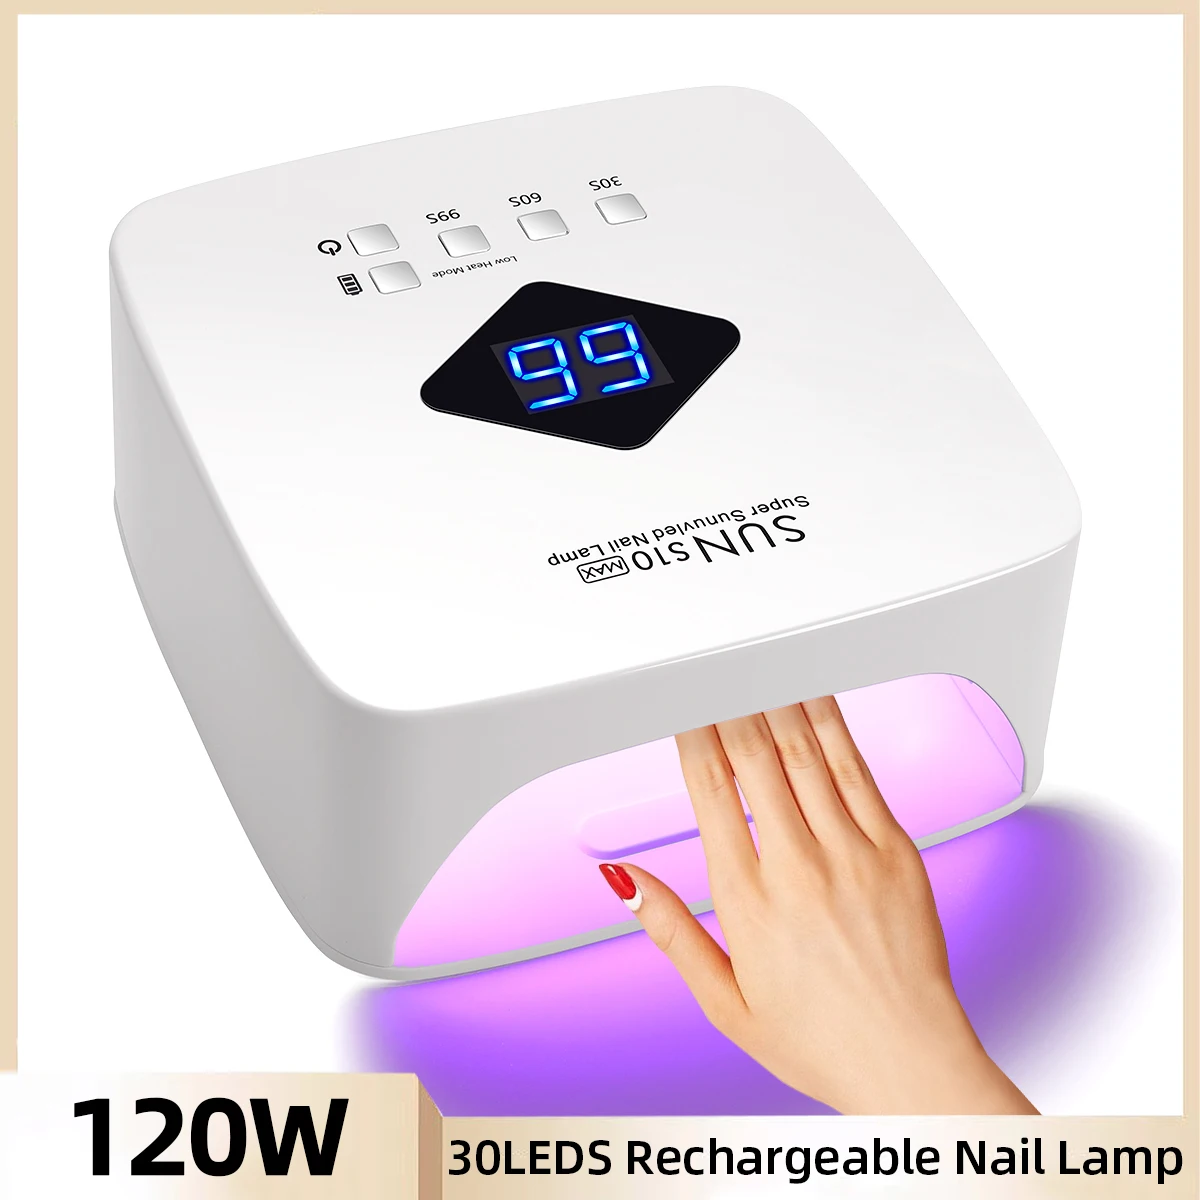 

120W UV LED Nail Lamp 30LEDS Gel Nail Light For Curing Gel Nail Polish UV Dryer With 3 Timers Setting Rechargeable Salon Tools